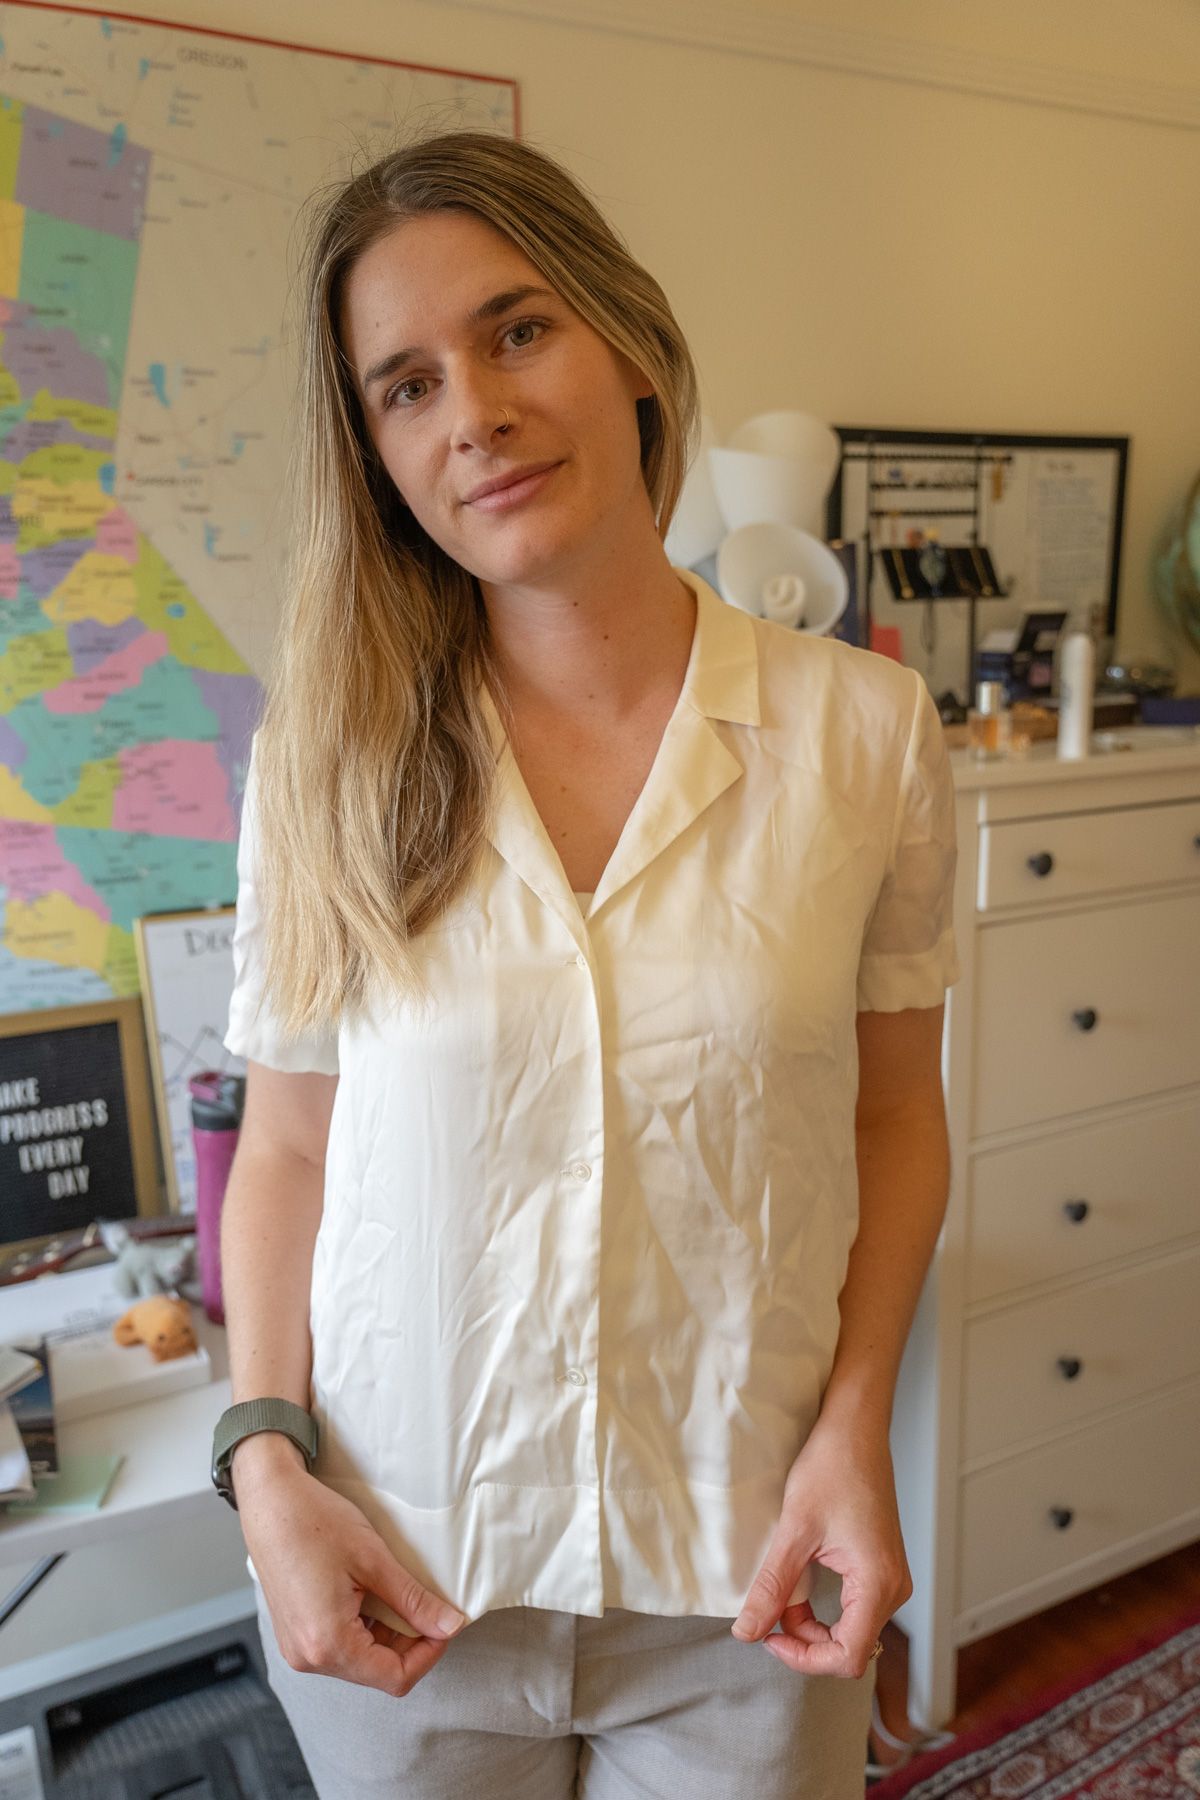 A young woman wearing a white Stretch Silk Short Sleeve Notch Collar Blouse stands, not smiling, in an interior setting with a map of California on the wall behind her.